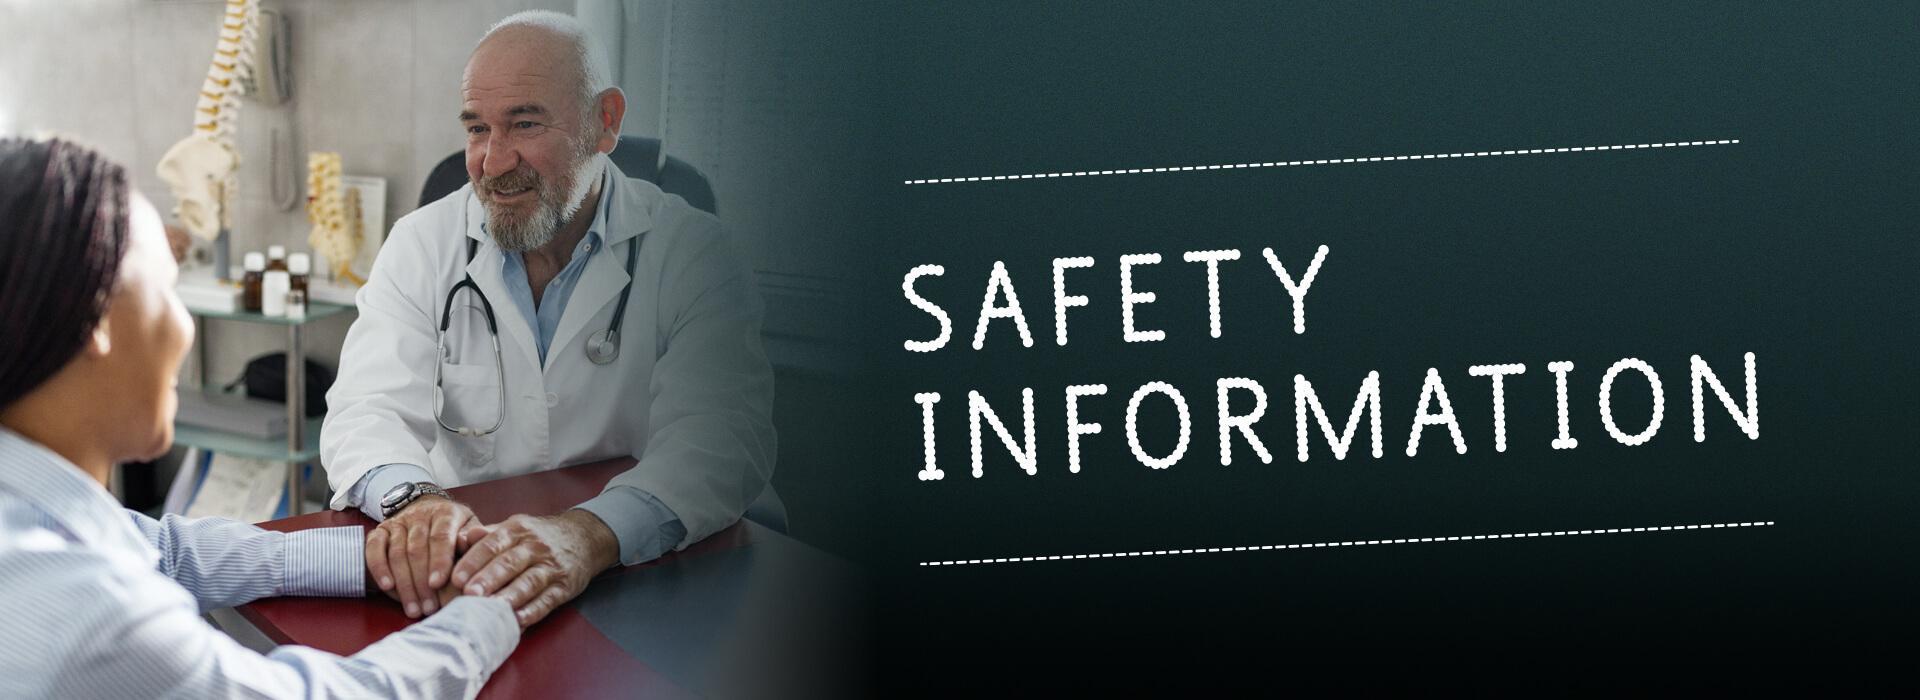 Top banner. Image of a doctor with a patient. Safety Information.